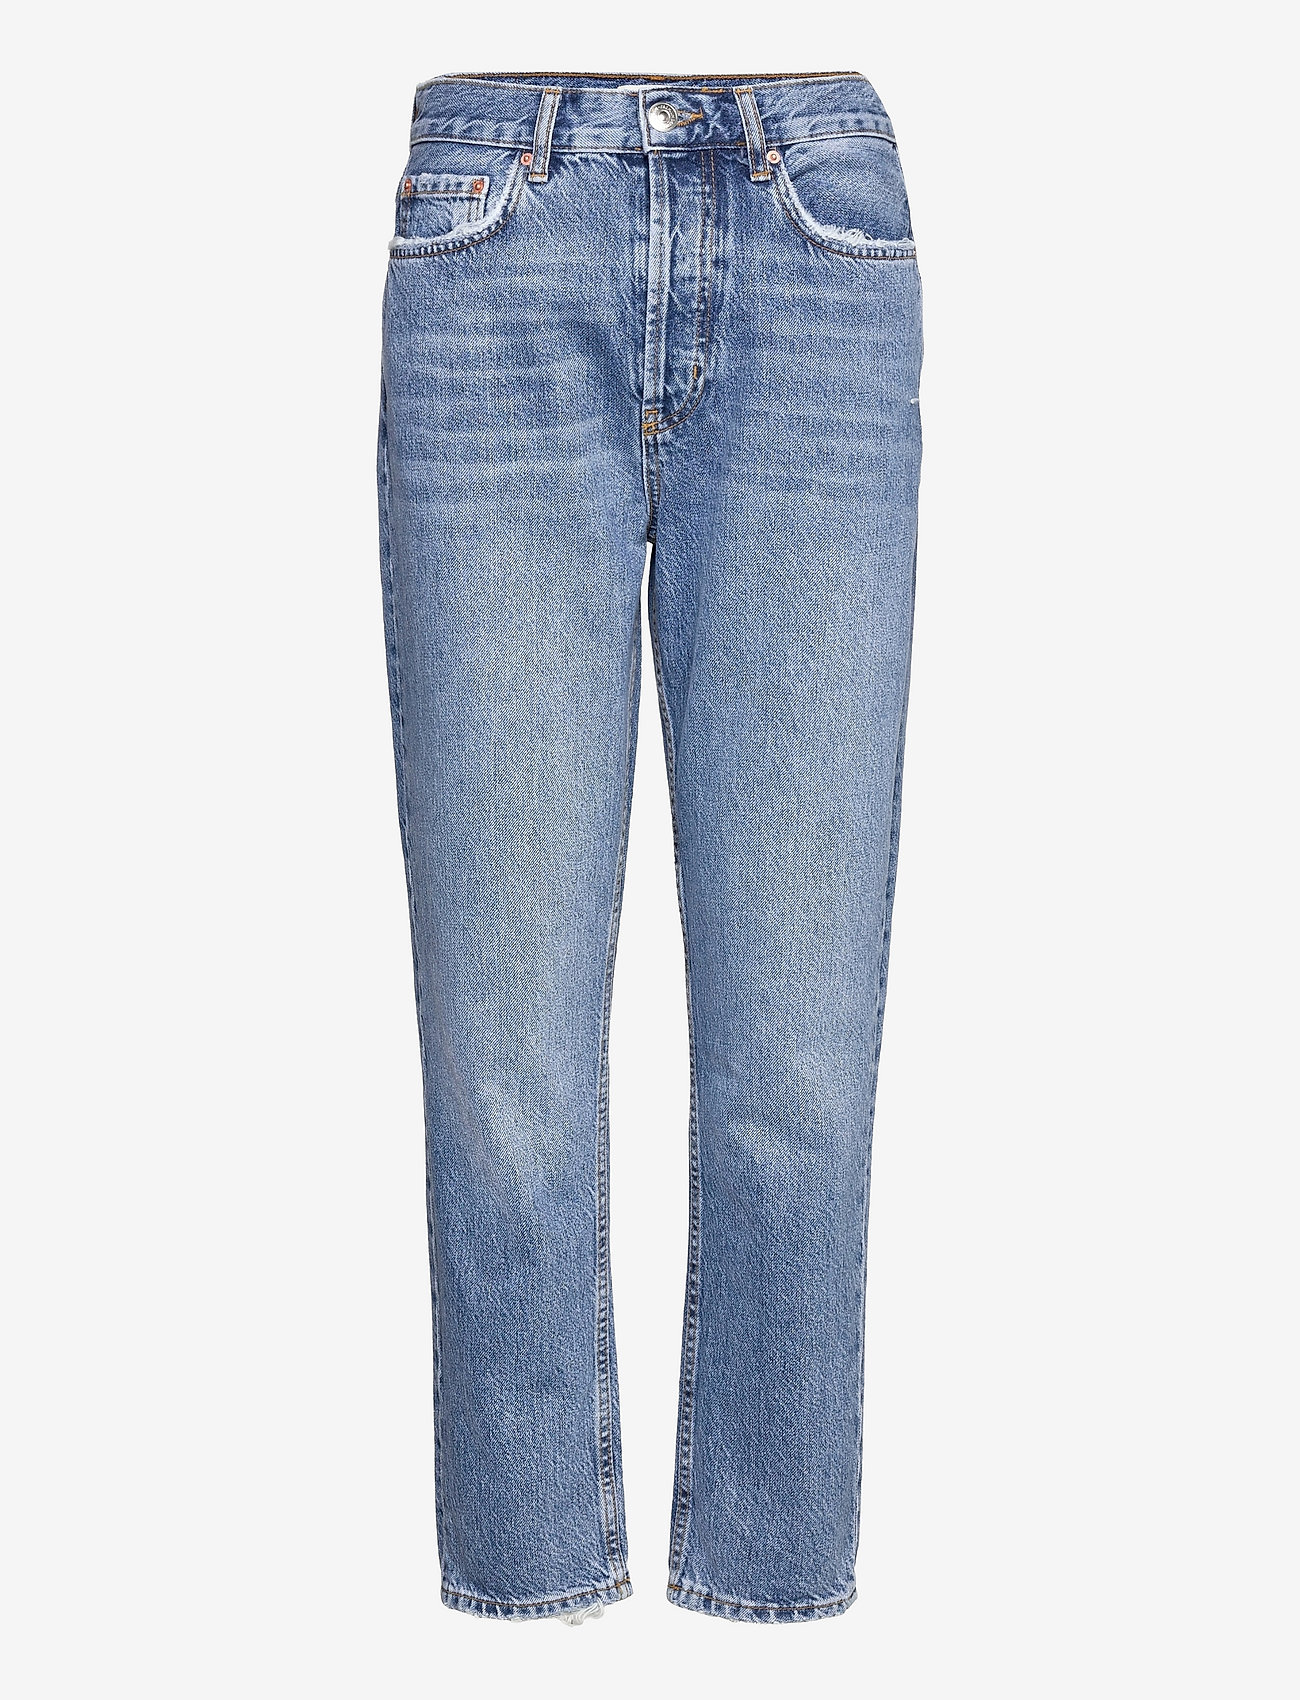 Gina Tricot - Original straight jeans - straight jeans - mid blue - 0